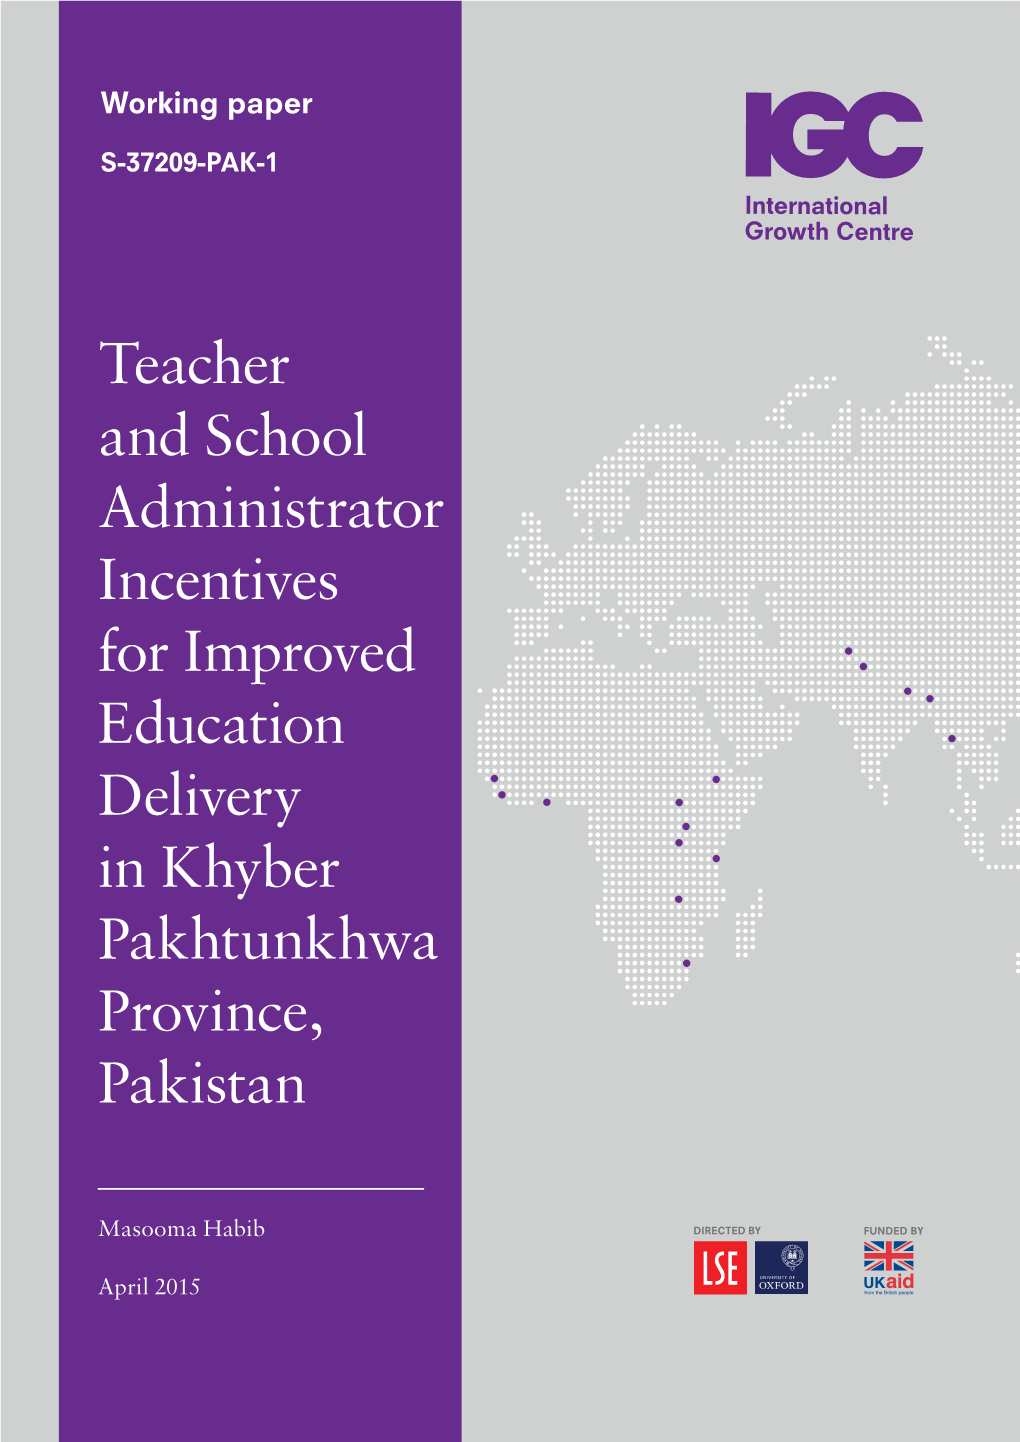 Teacher and School Administrator Incentives for Improved Education Delivery in Khyber Pakhtunkhwa Province, Pakistan